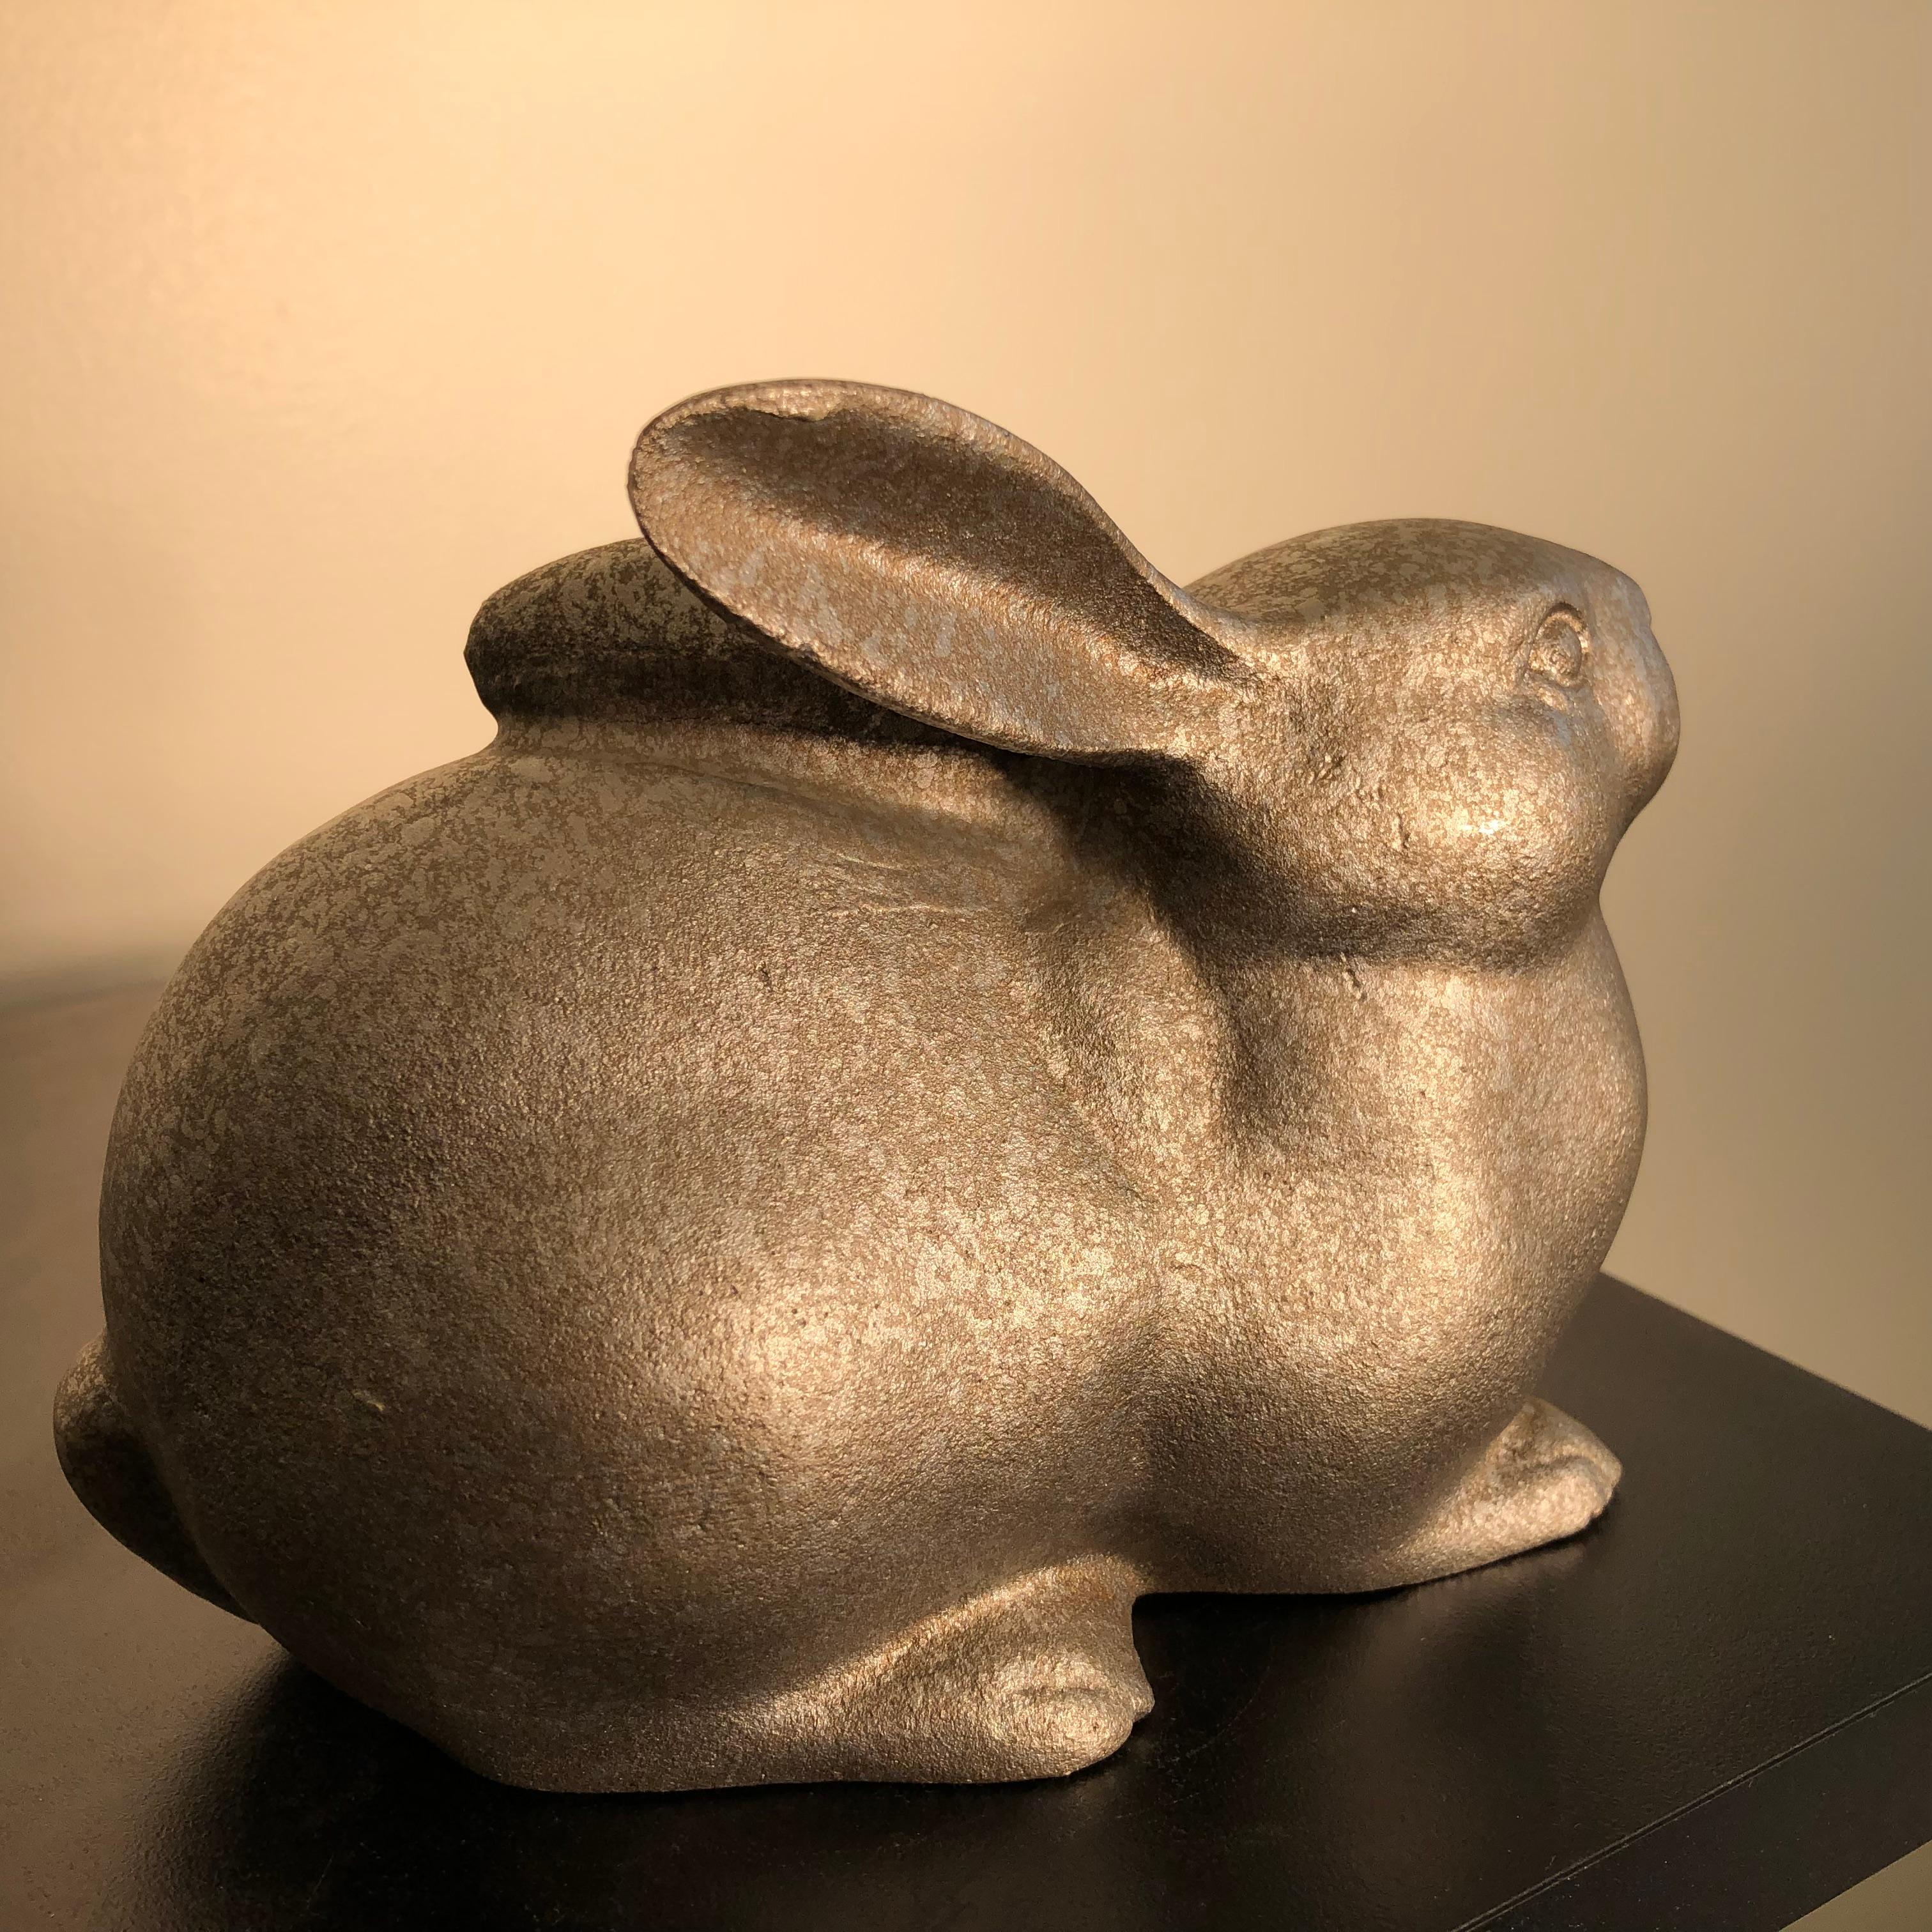 Japanese Big Bold Alert Rabbit from Japan, Handsome and Finely Sculpted